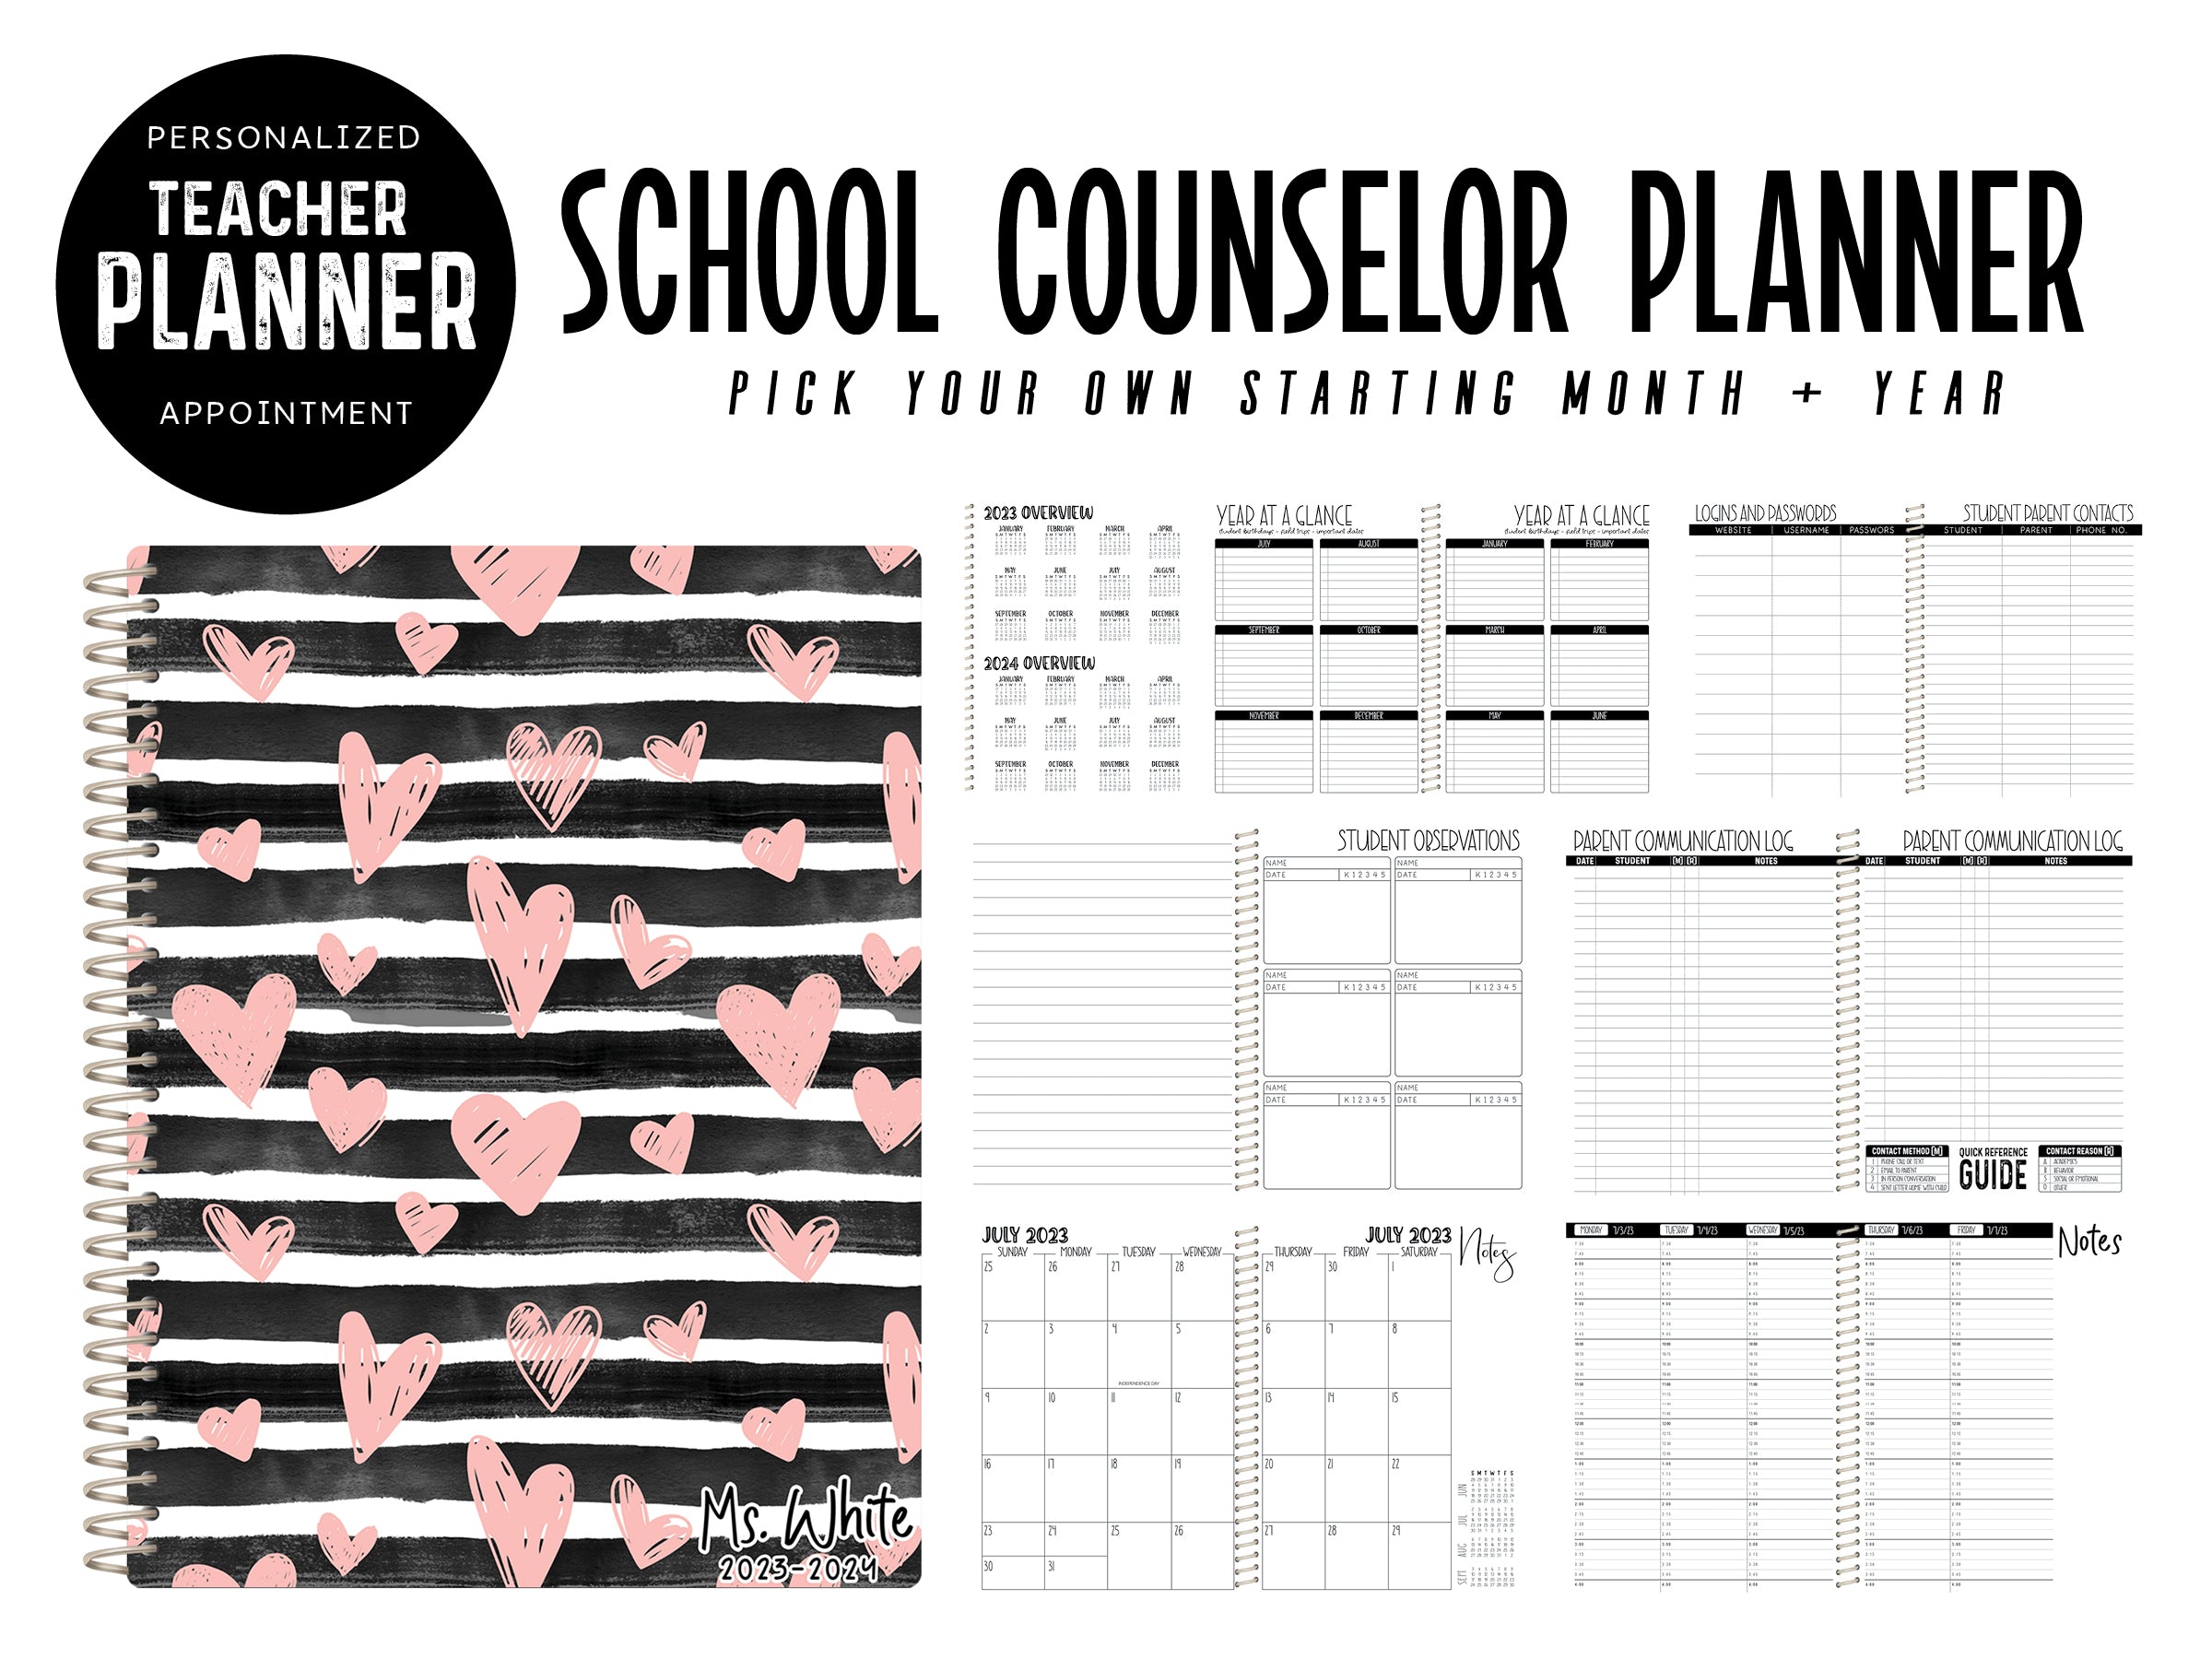 School Counselor Appointment Book Planner - CHOOSE A KBD BACKGROUND